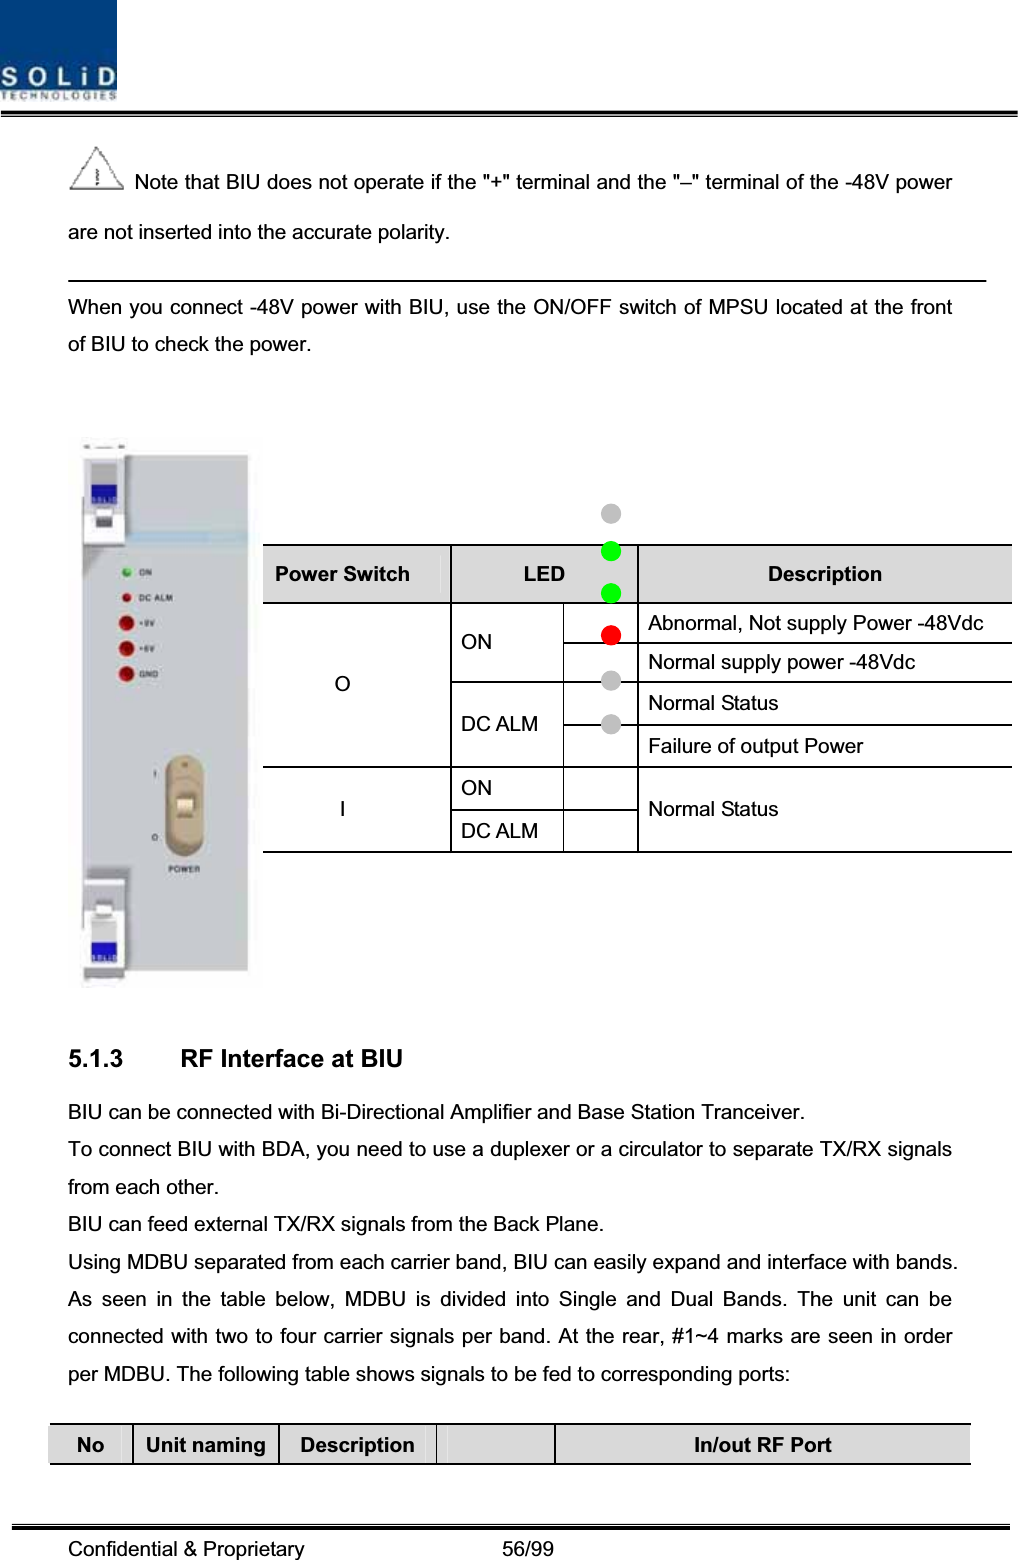 Confidential &amp; Proprietary                   56/99   Note that BIU does not operate if the &quot;+&quot; terminal and the &quot;–&quot; terminal of the -48V power are not inserted into the accurate polarity.   When you connect -48V power with BIU, use the ON/OFF switch of MPSU located at the front of BIU to check the power. 5.1.3  RF Interface at BIU BIU can be connected with Bi-Directional Amplifier and Base Station Tranceiver.     To connect BIU with BDA, you need to use a duplexer or a circulator to separate TX/RX signals from each other. BIU can feed external TX/RX signals from the Back Plane. Using MDBU separated from each carrier band, BIU can easily expand and interface with bands. As seen in the table below, MDBU is divided into Single and Dual Bands. The unit can be connected with two to four carrier signals per band. At the rear, #1~4 marks are seen in order per MDBU. The following table shows signals to be fed to corresponding ports: No Unit naming Description  In/out RF Port Power Switch  LED Description   Abnormal, Not supply Power -48Vdc ON  Normal supply power -48Vdc  Normal Status ODC ALM   Failure of output Power ON  IDC ALM   Normal Status 